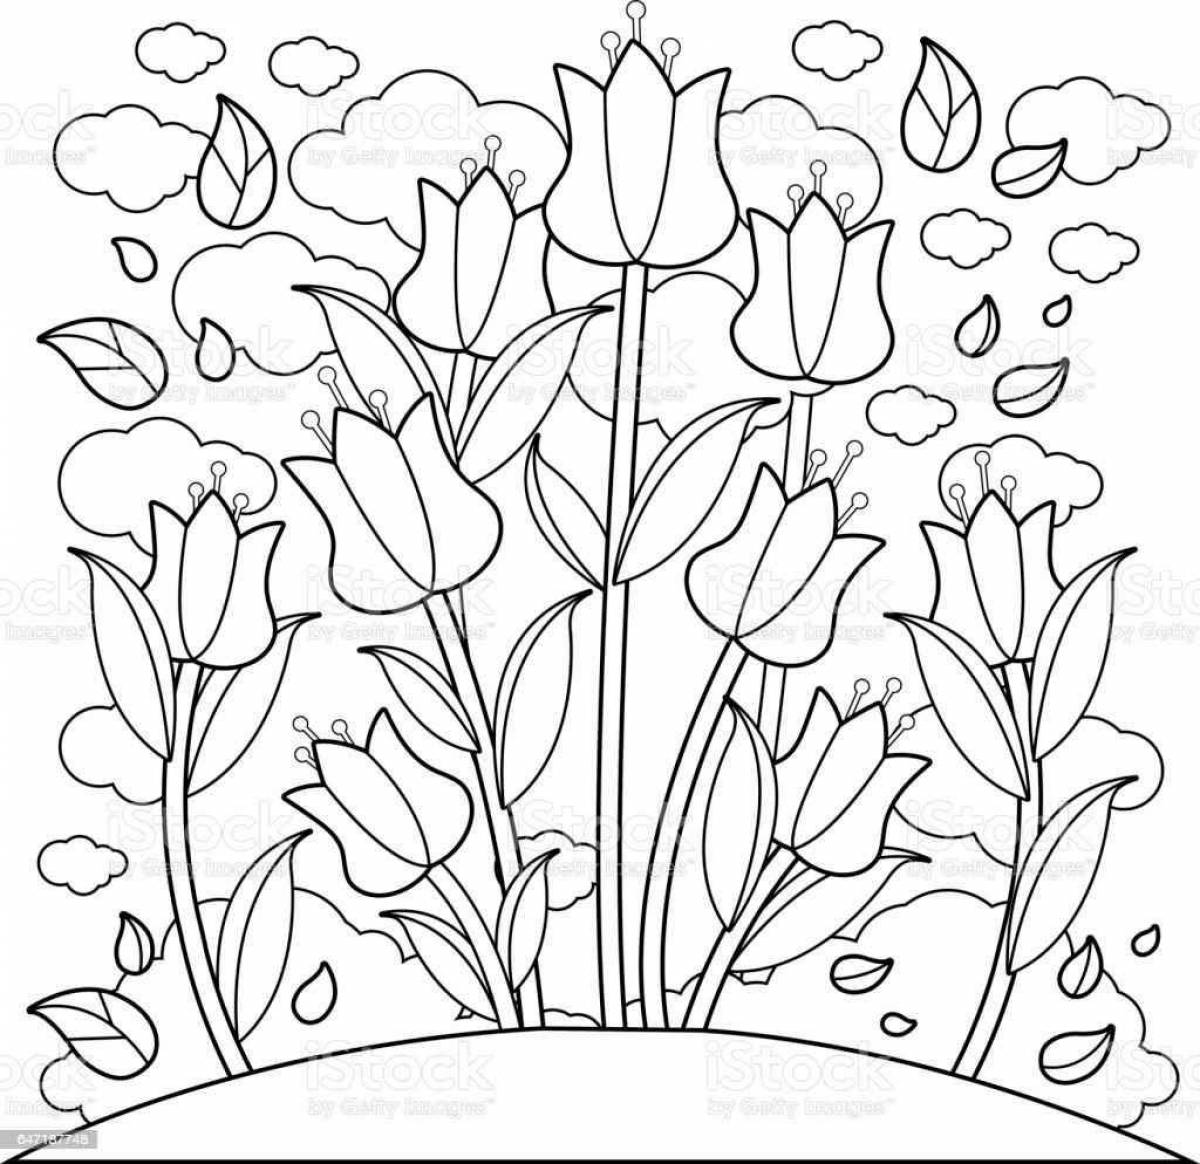 Vibrant meadow coloring for children